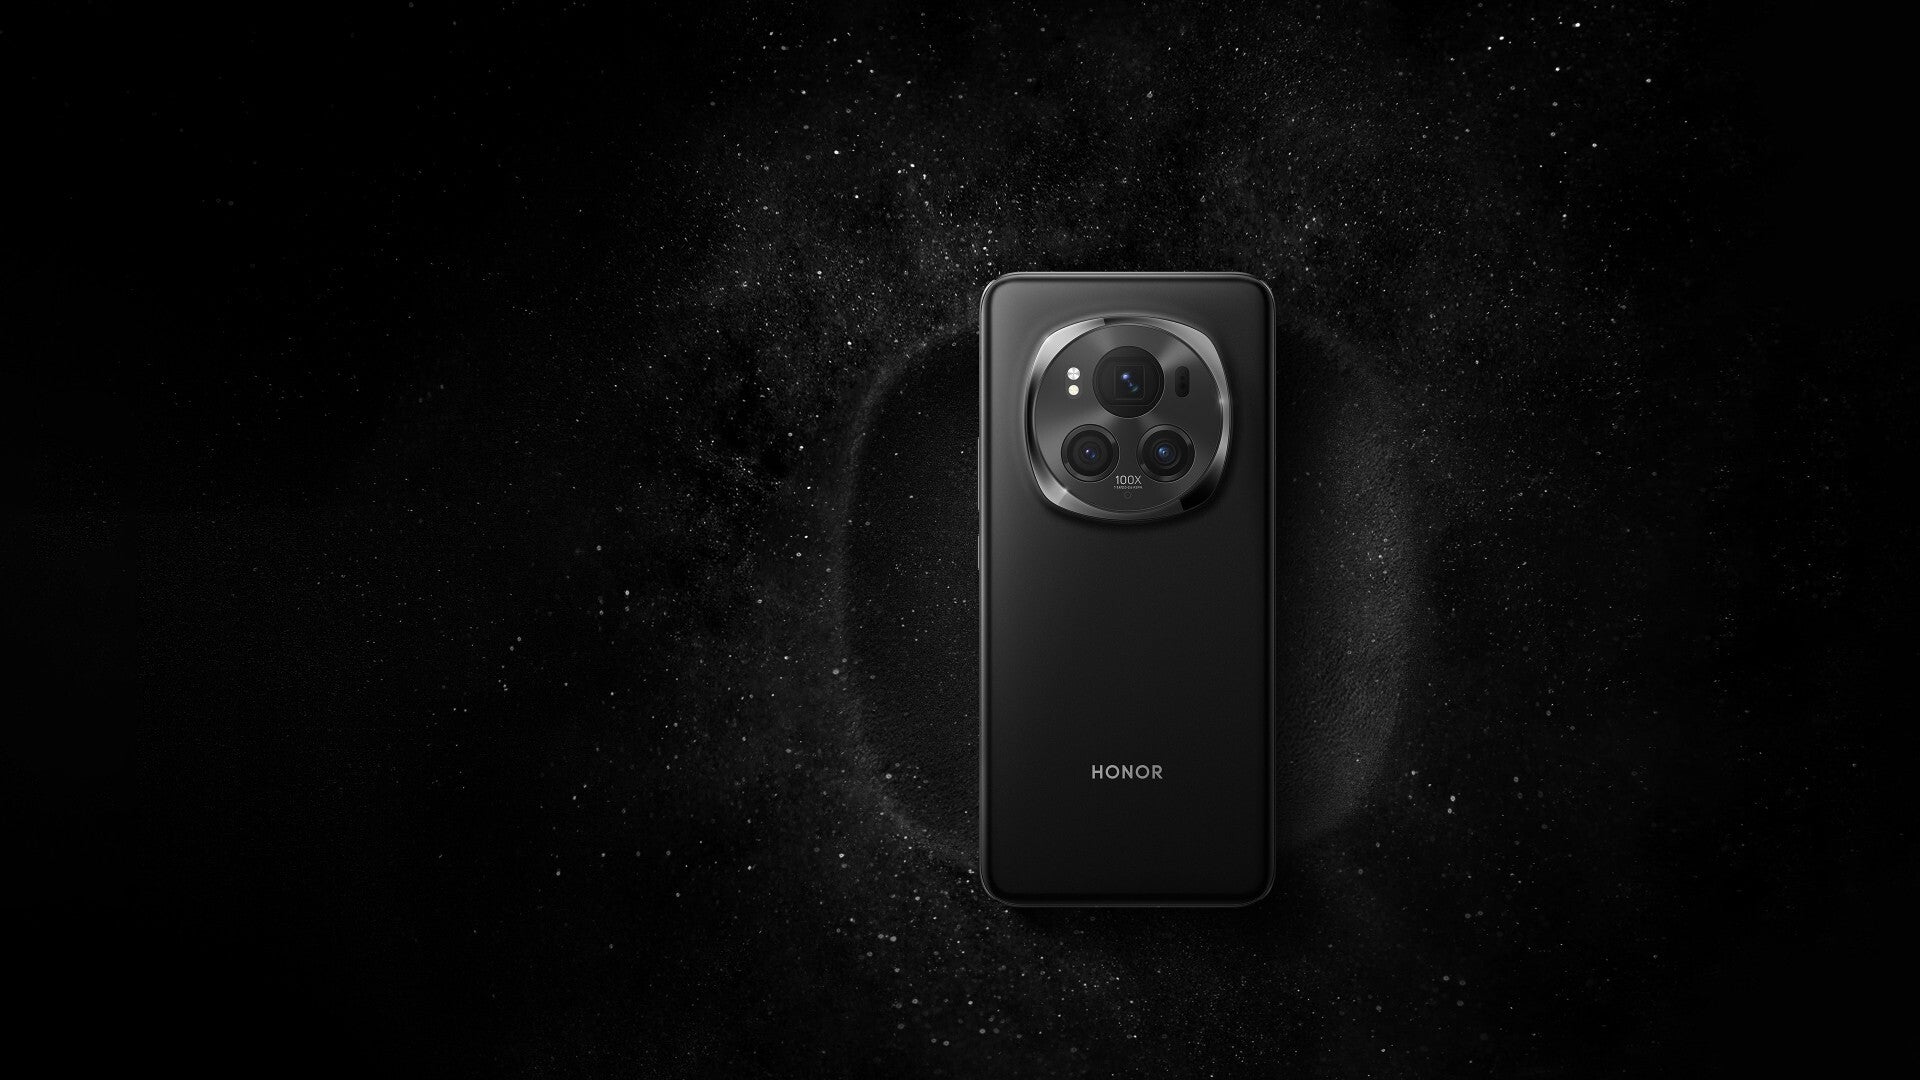 The Honor Magic 6 Pro is now official with magical camera, paranormal battery, and AI